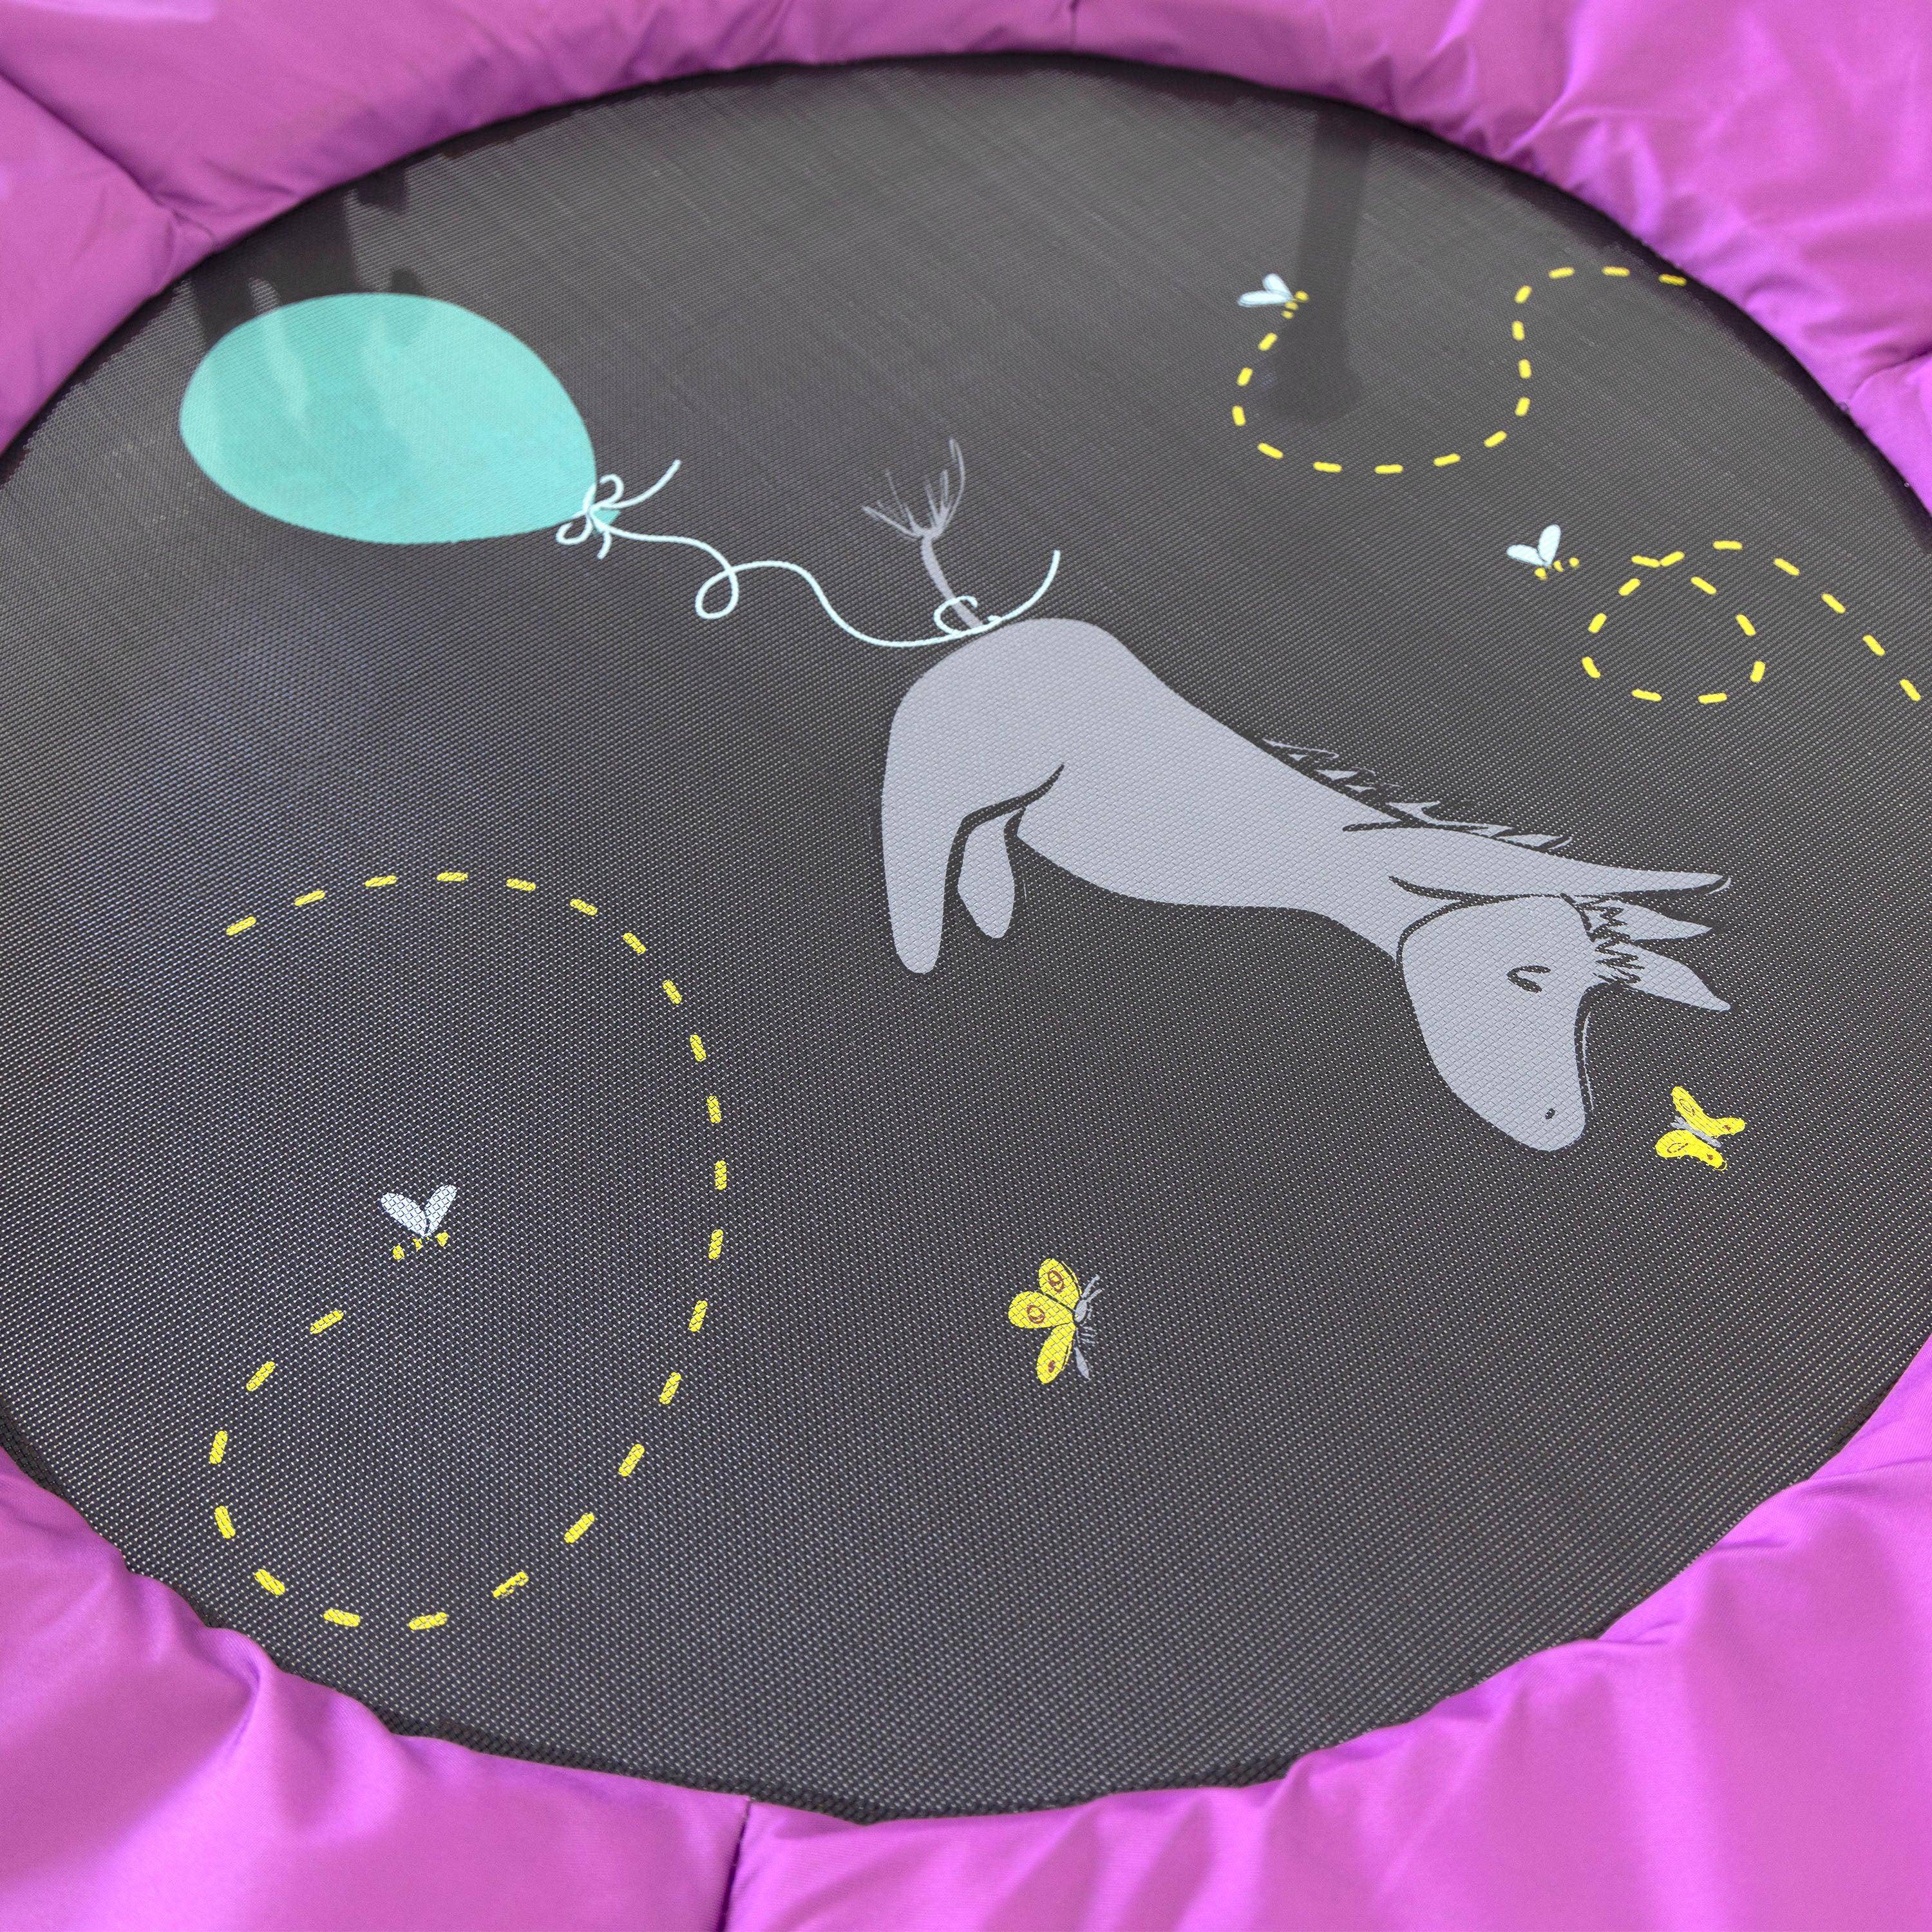 A vintage Eeyore is printed on the jump mat along with a blue balloon and yellow butterflies and honeybees. 